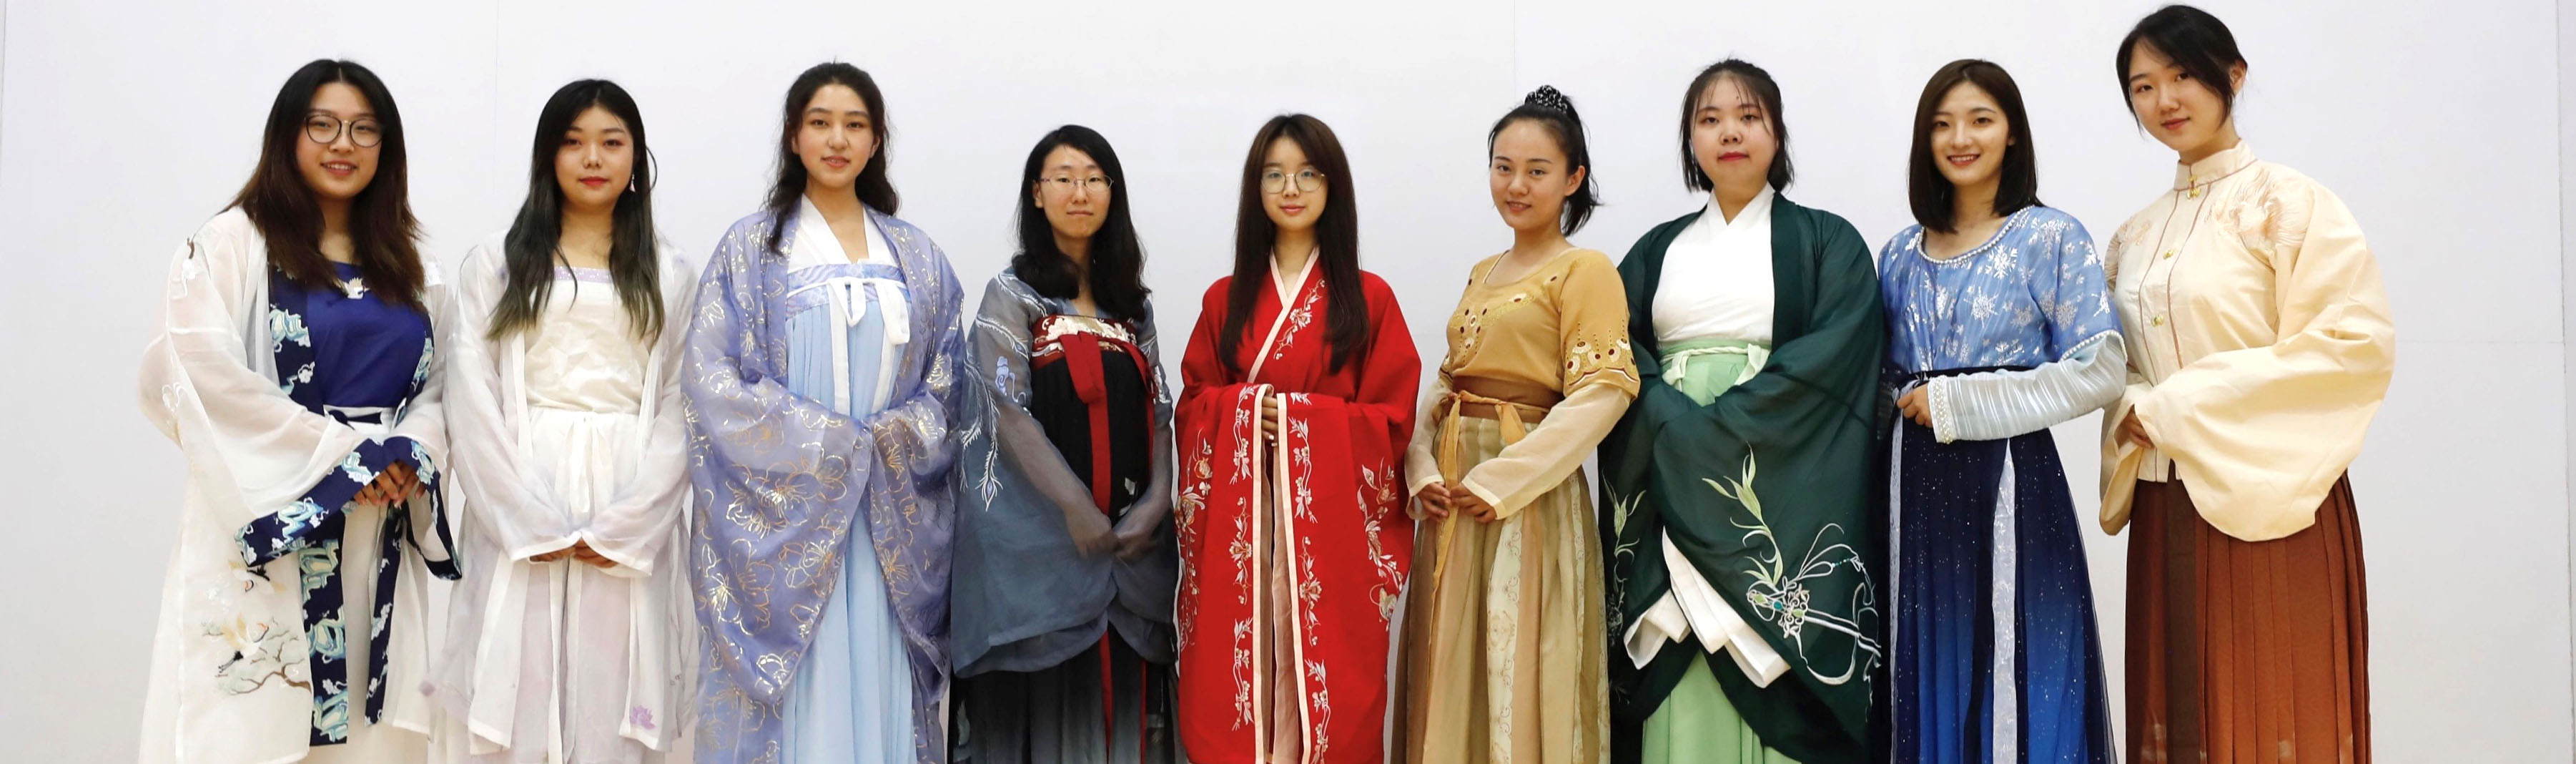 Bella and friends dress in traditional Chinese gowns